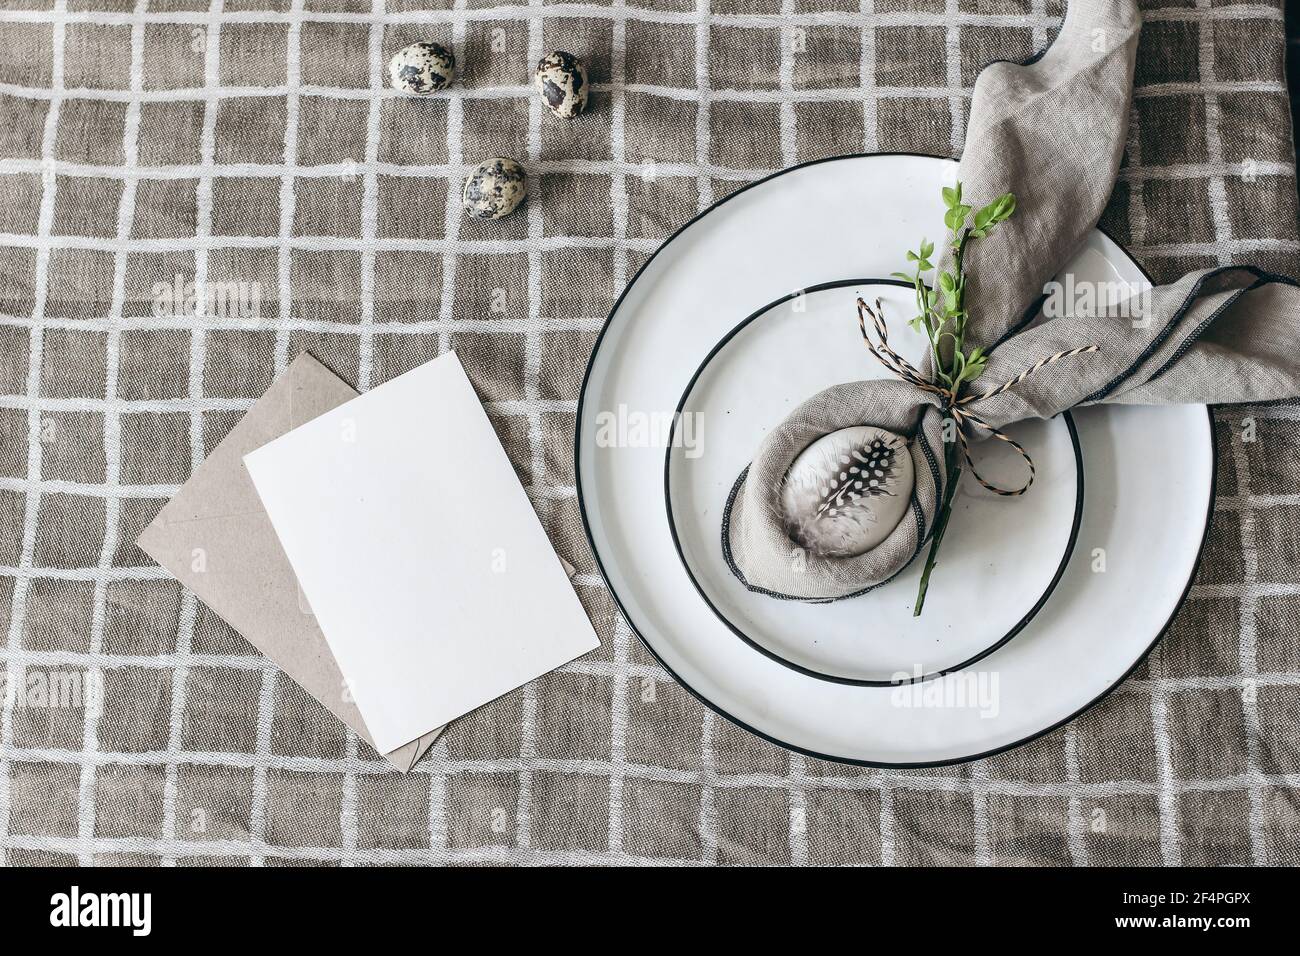 Easter decorative table setting. Spring still life with greeting card mockup, quail and hen eggs. Plates, napkin folding decoration on beige linen tab Stock Photo